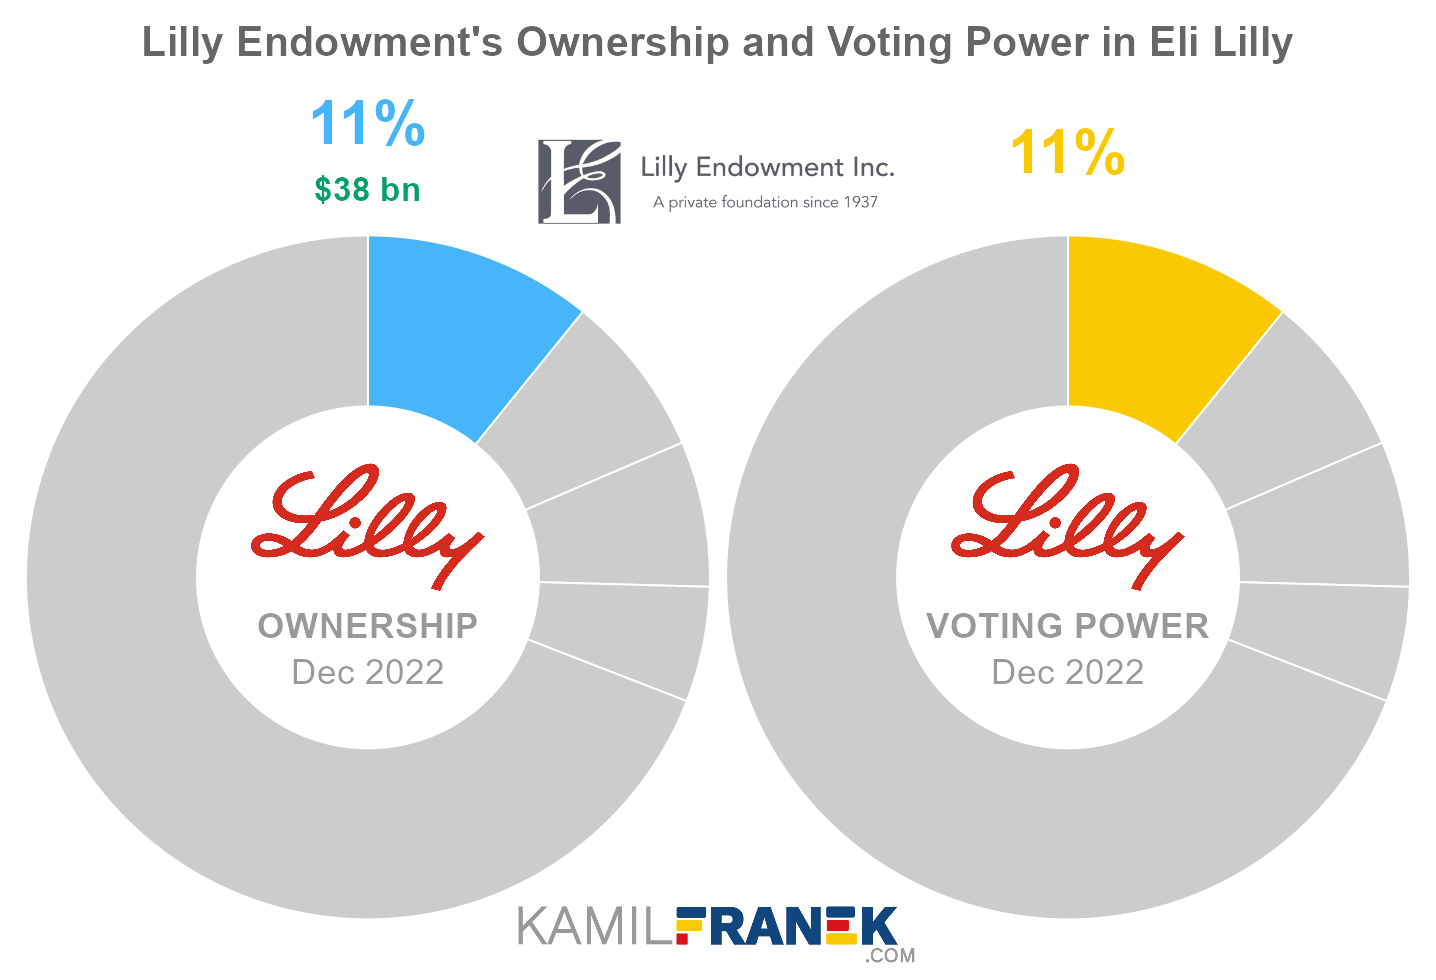 Lilly Endowment's share ownership and voting power in Eli Lilly (chart)